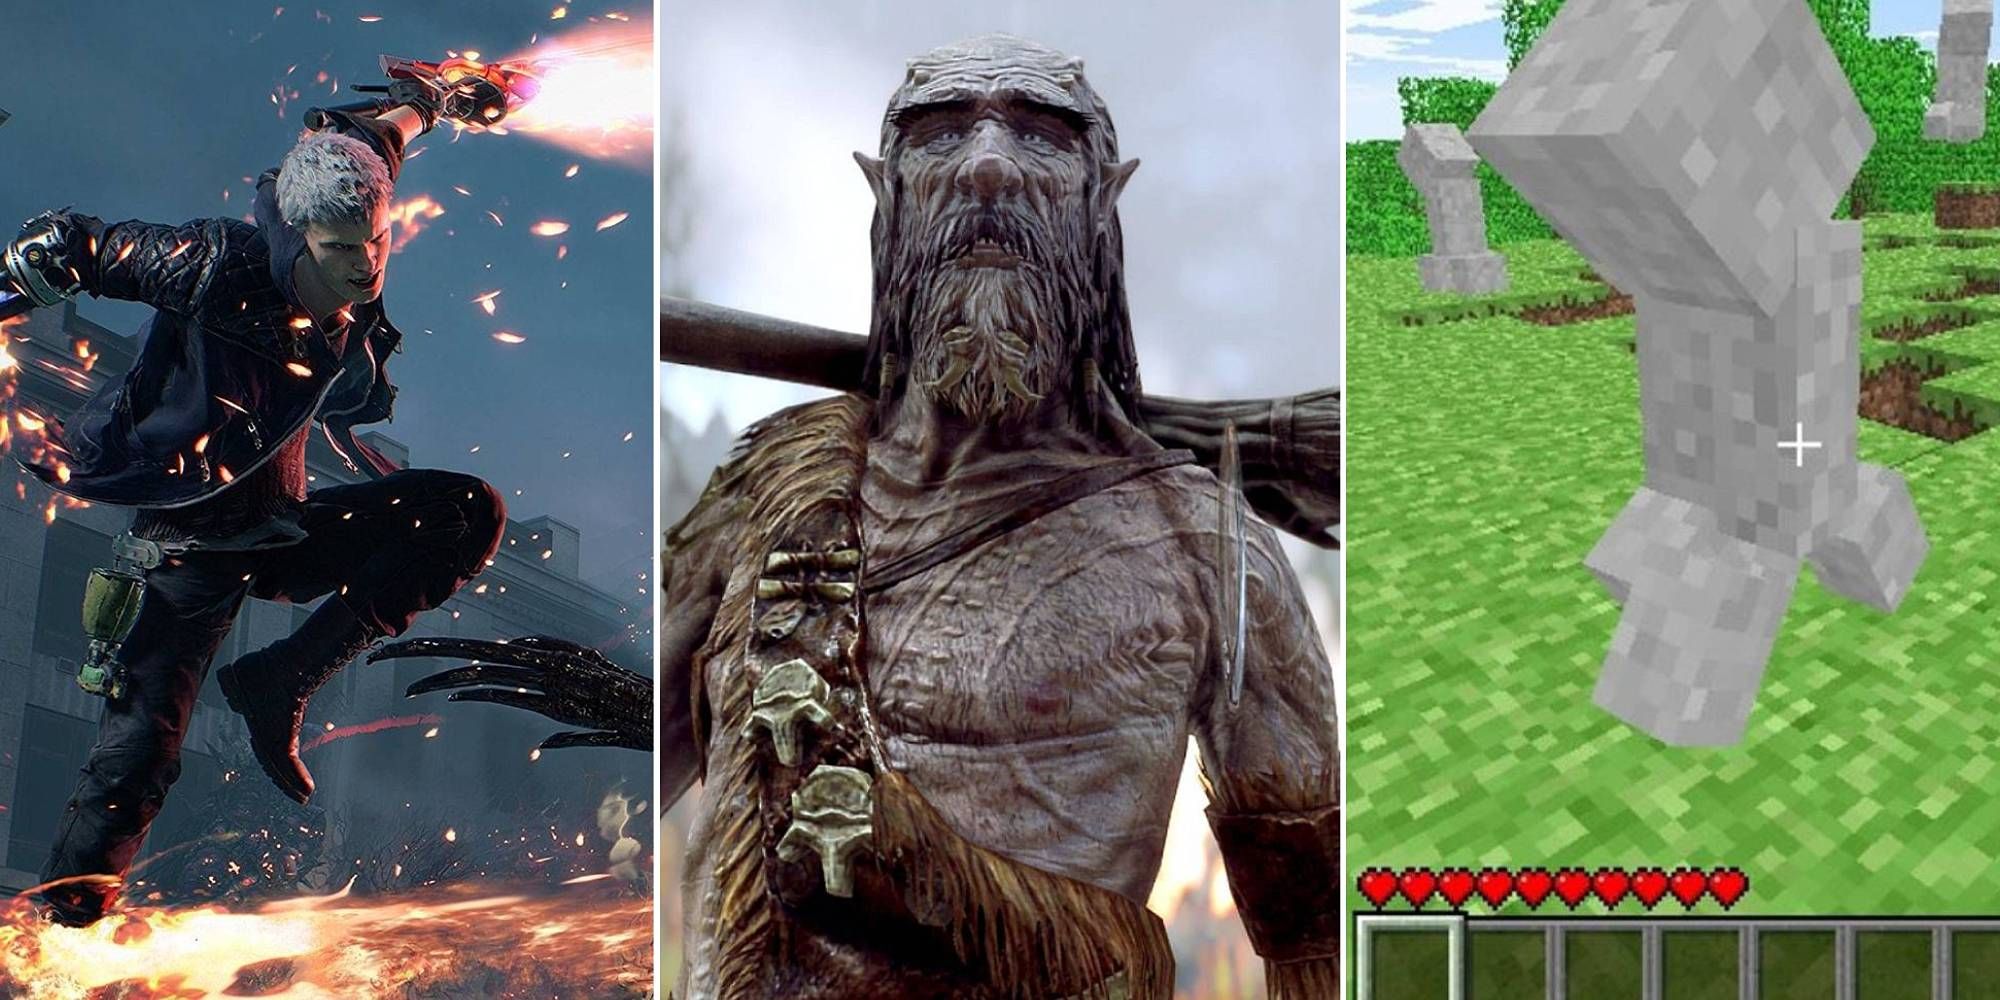 A collage of images from Nero in Devil May Cry, giants from Skyrim and an alpha image of creepers of Minecraft